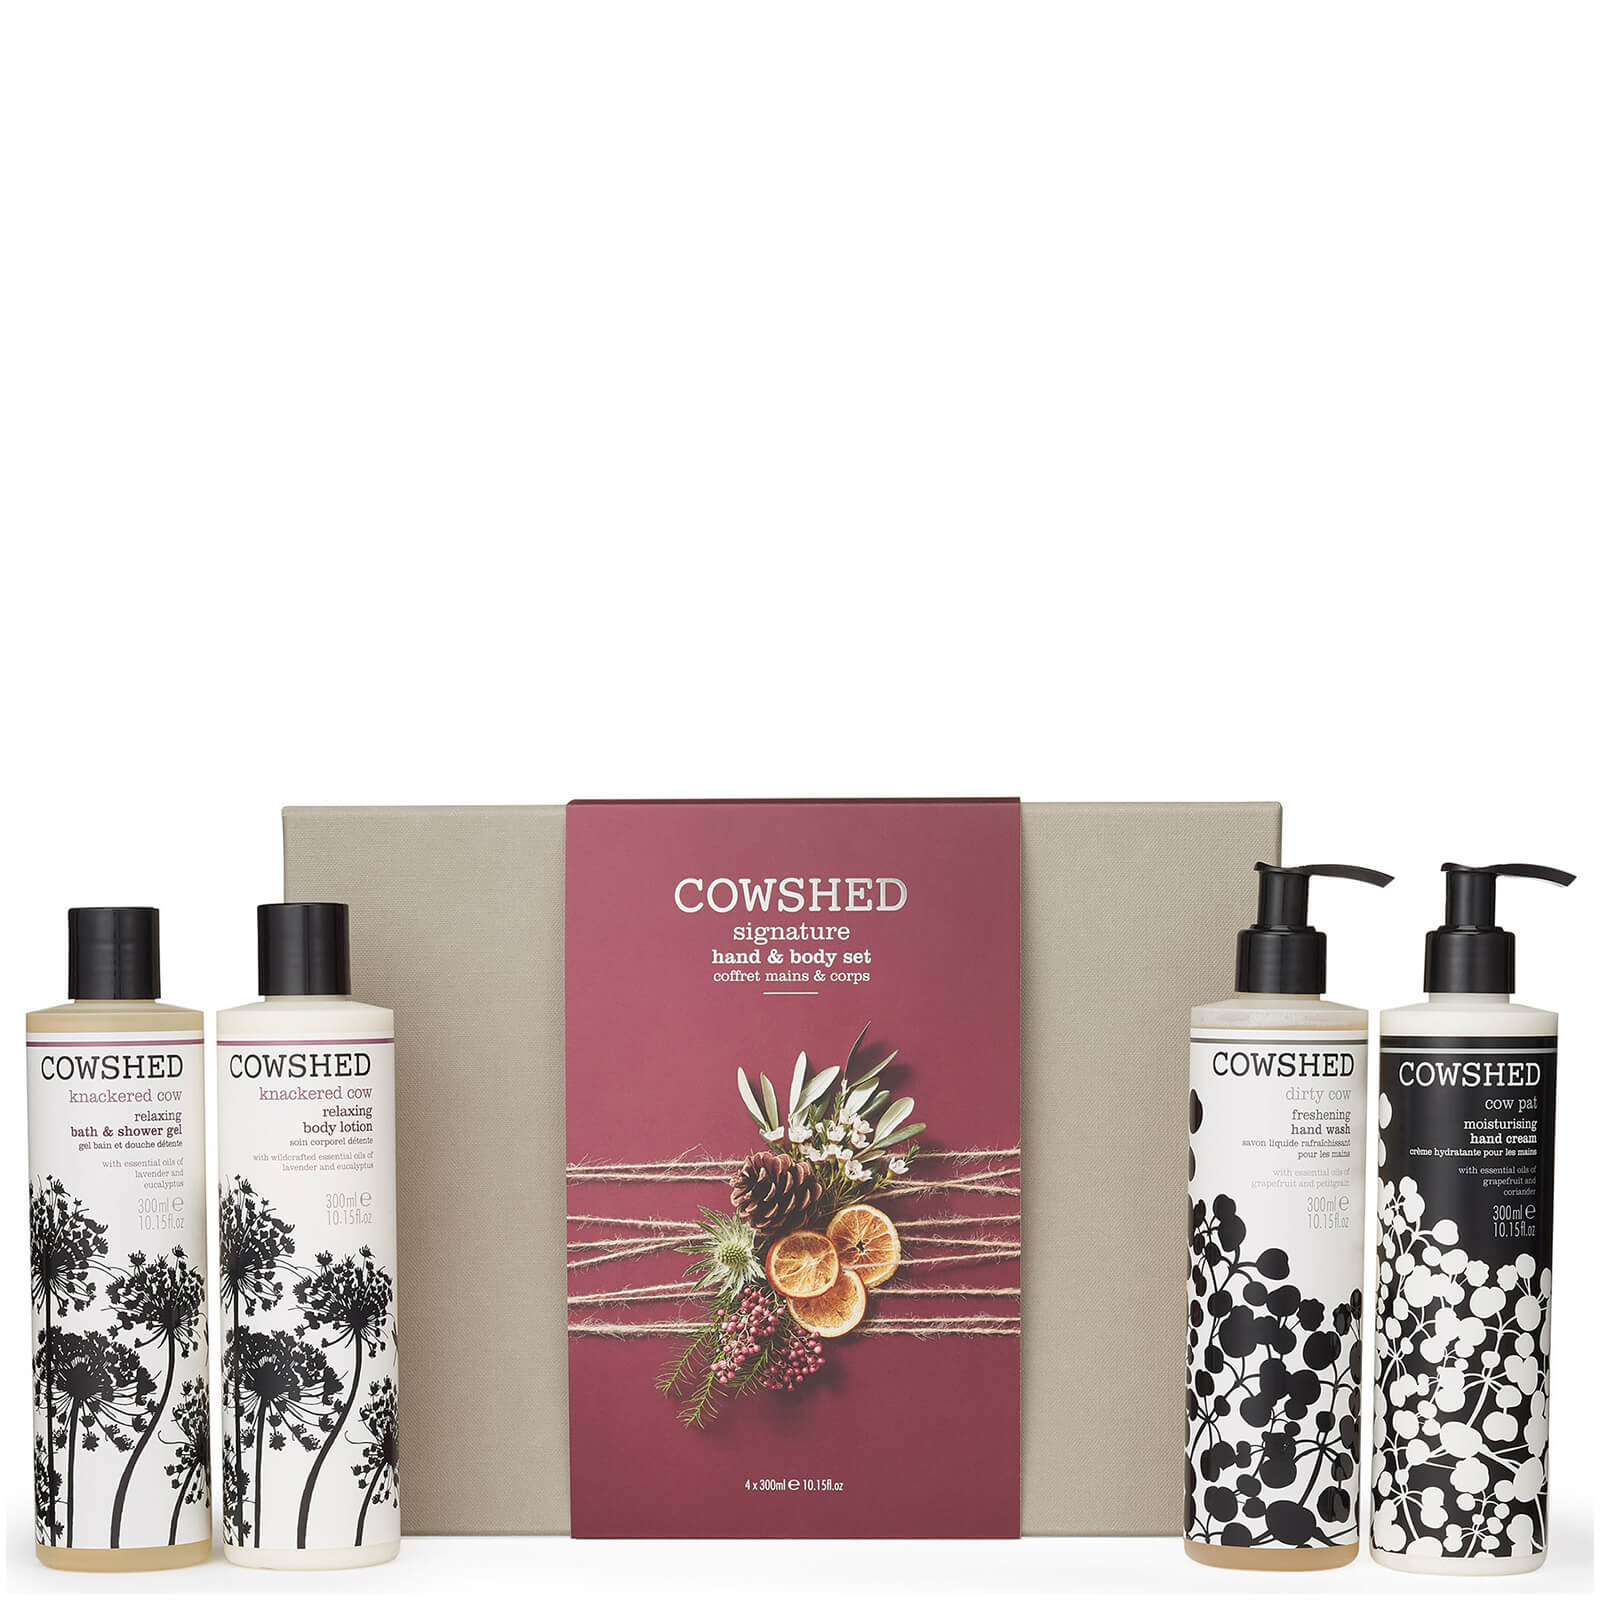 Cowshed Signature Hand and Body Set